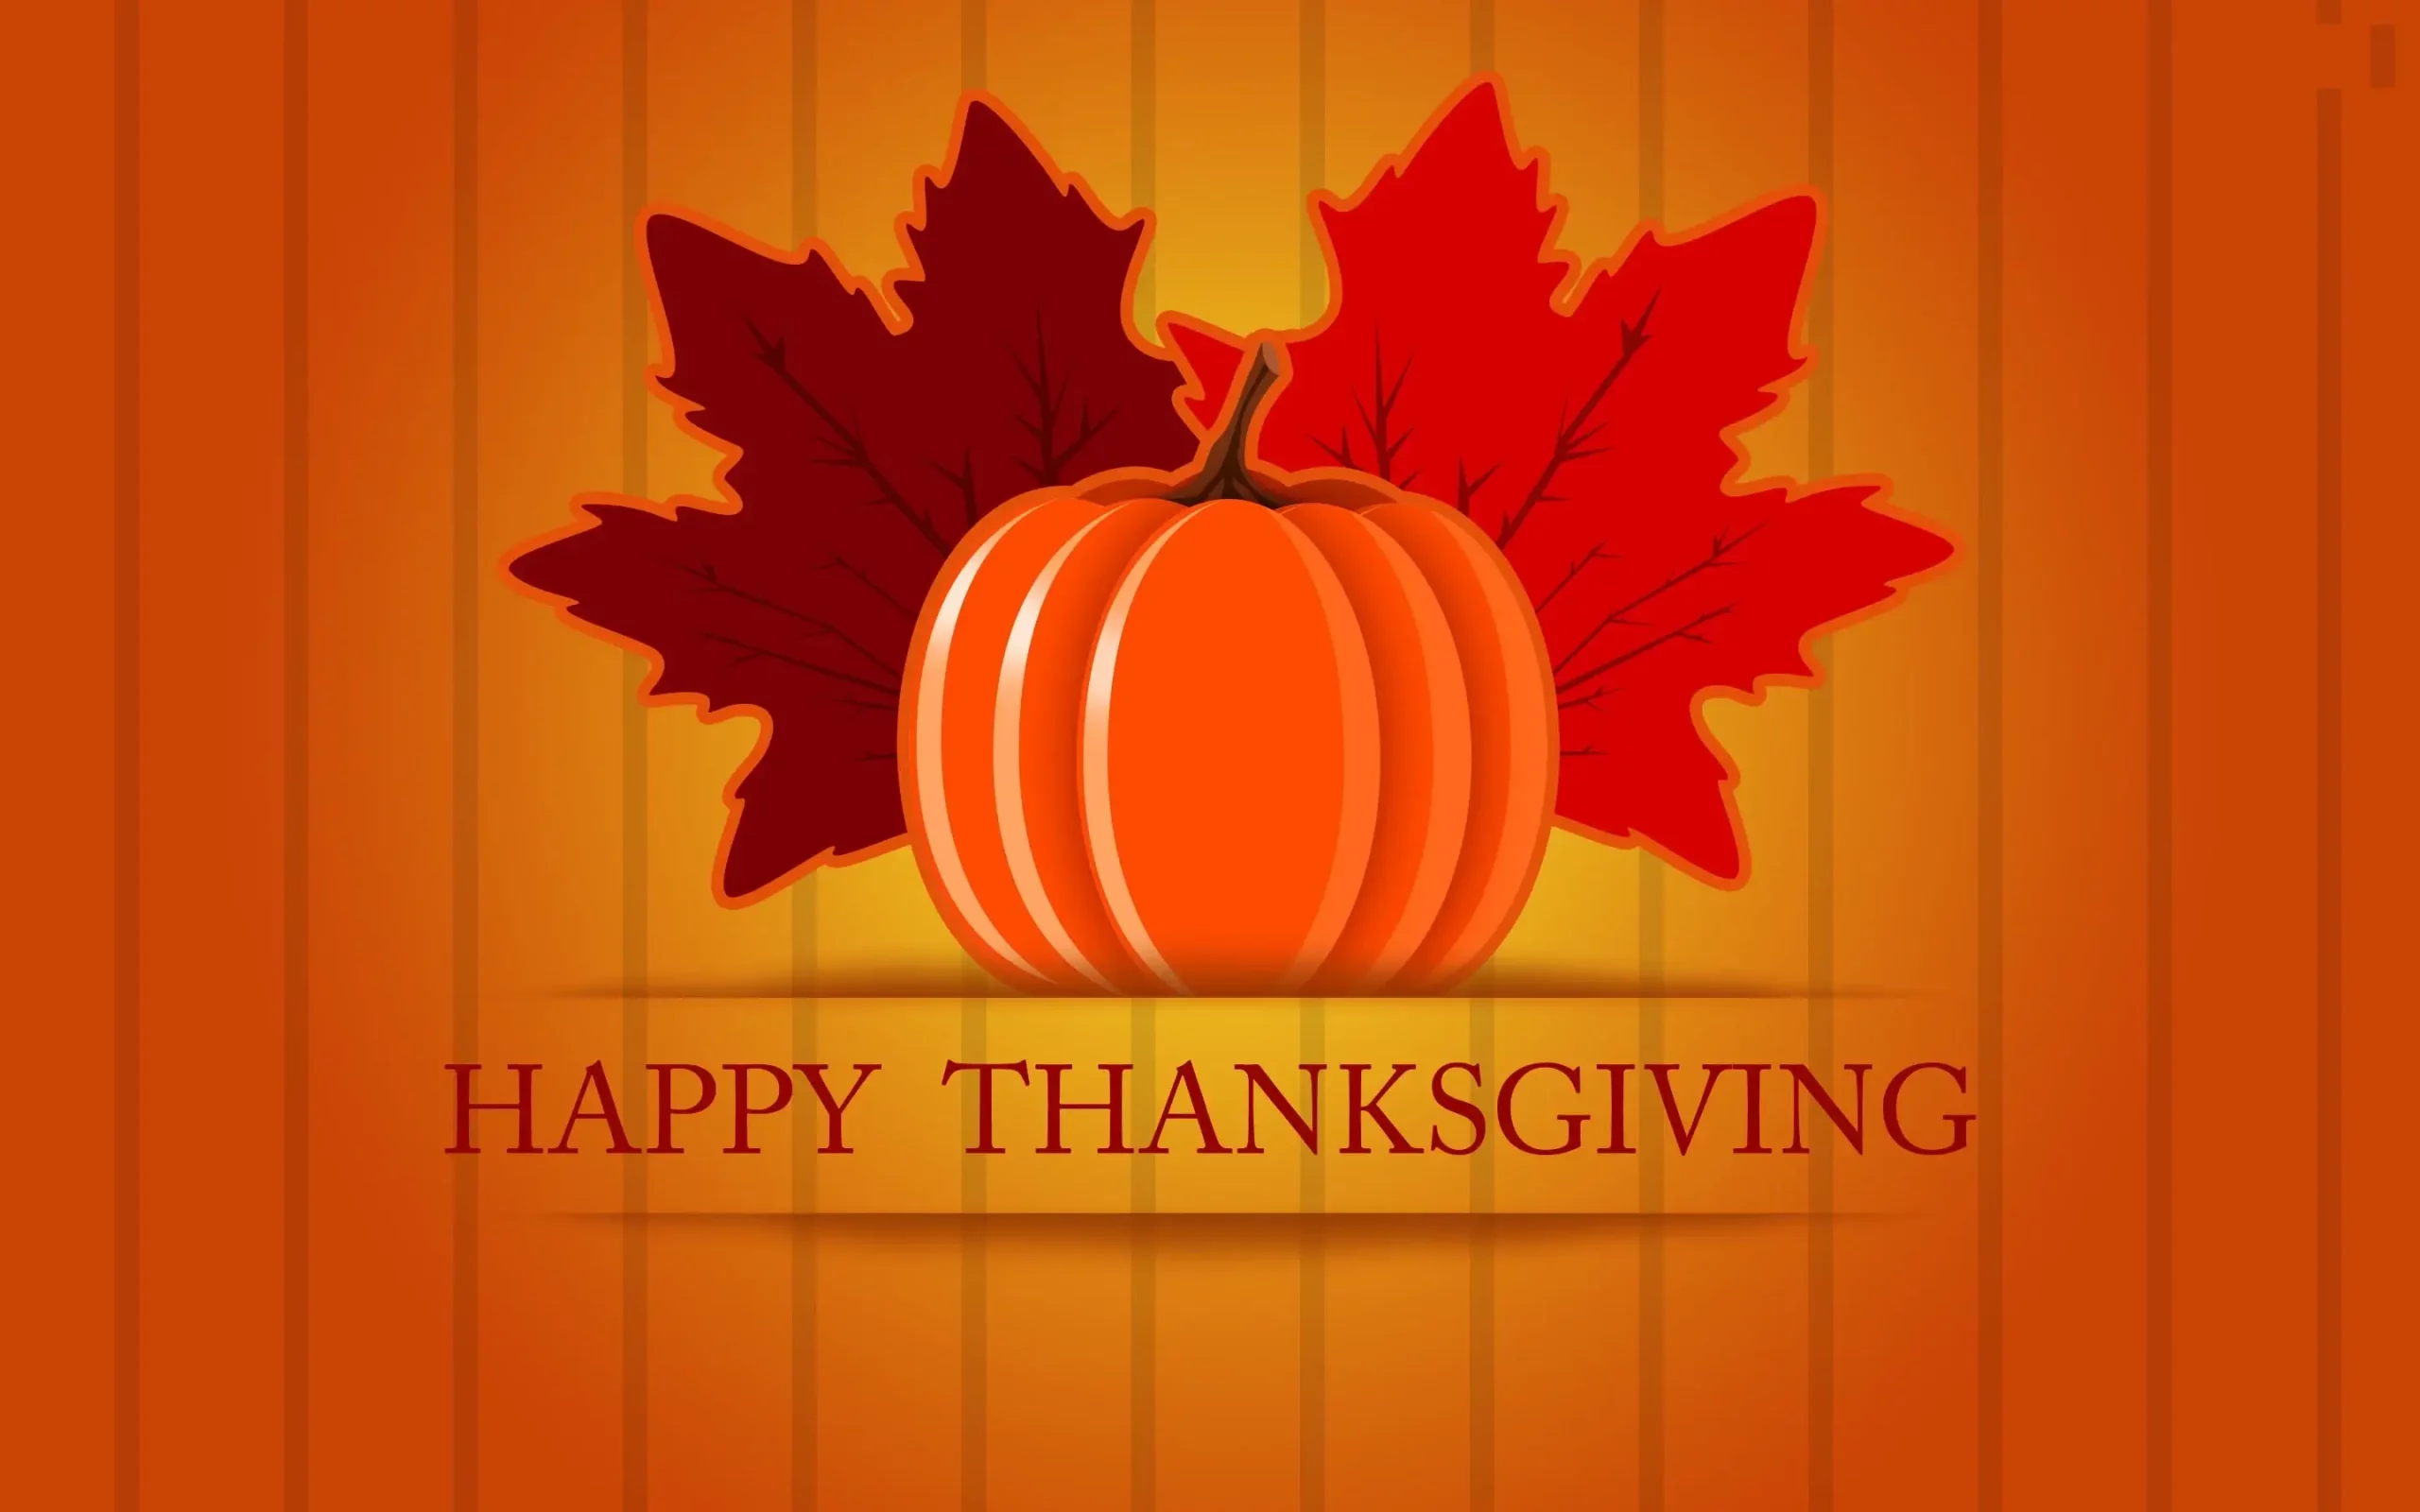 Thanksgiving Wallpapers & Backgrounds For FREE